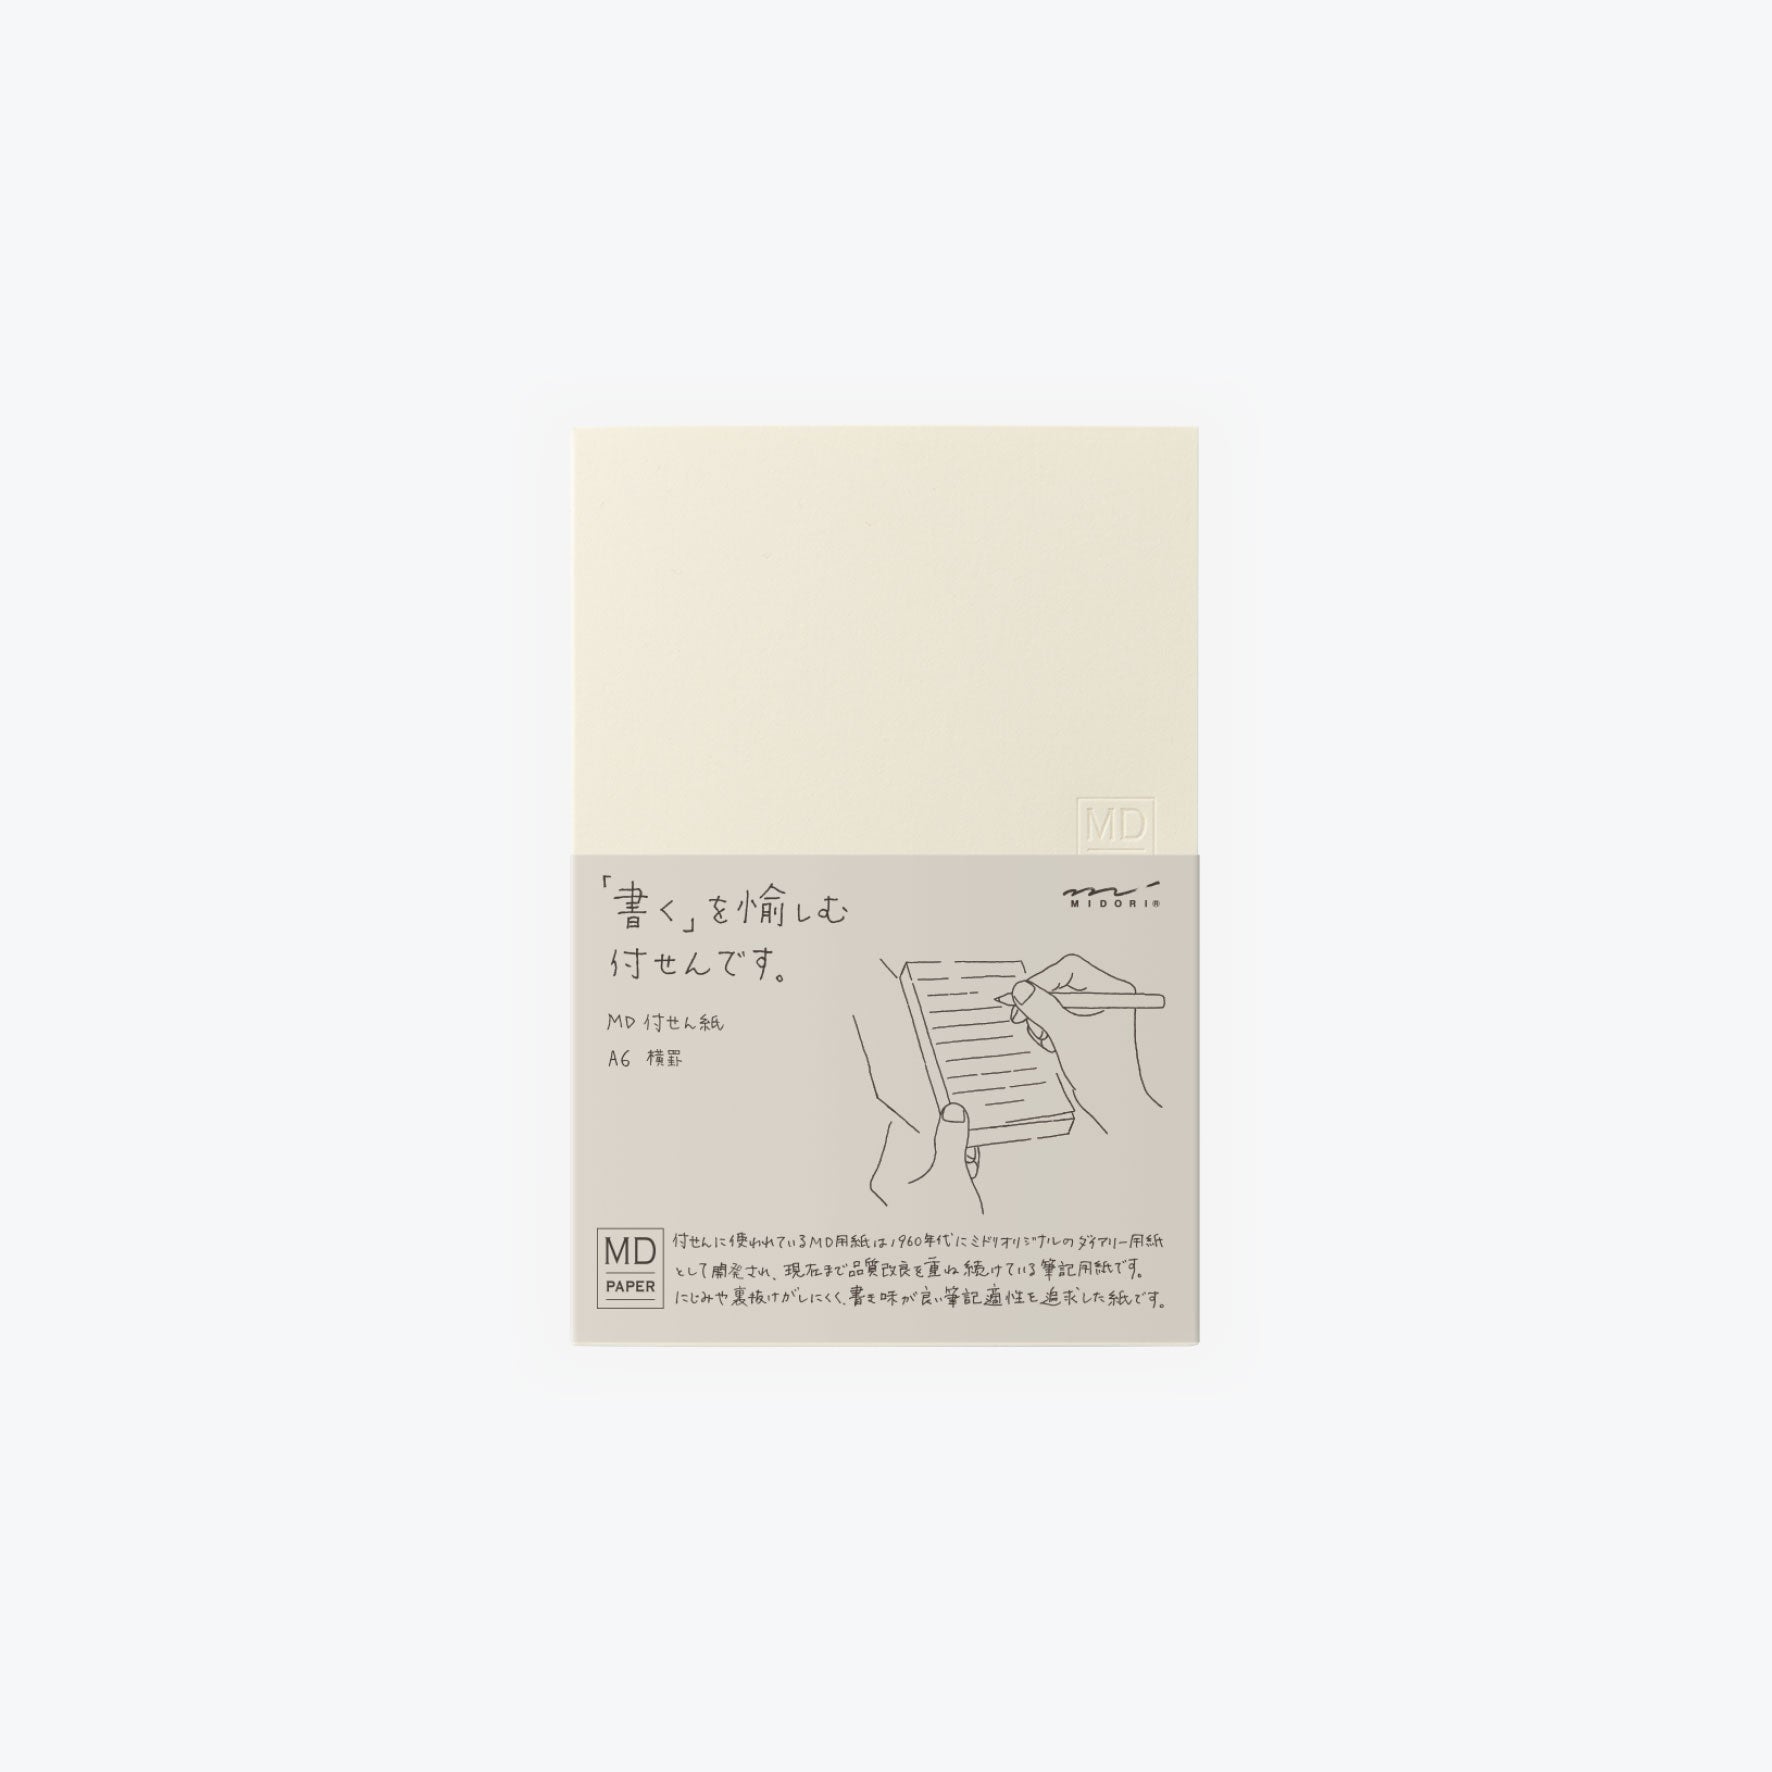 Midori - Notepad - Sticky - A6 - Lined <Outgoing>